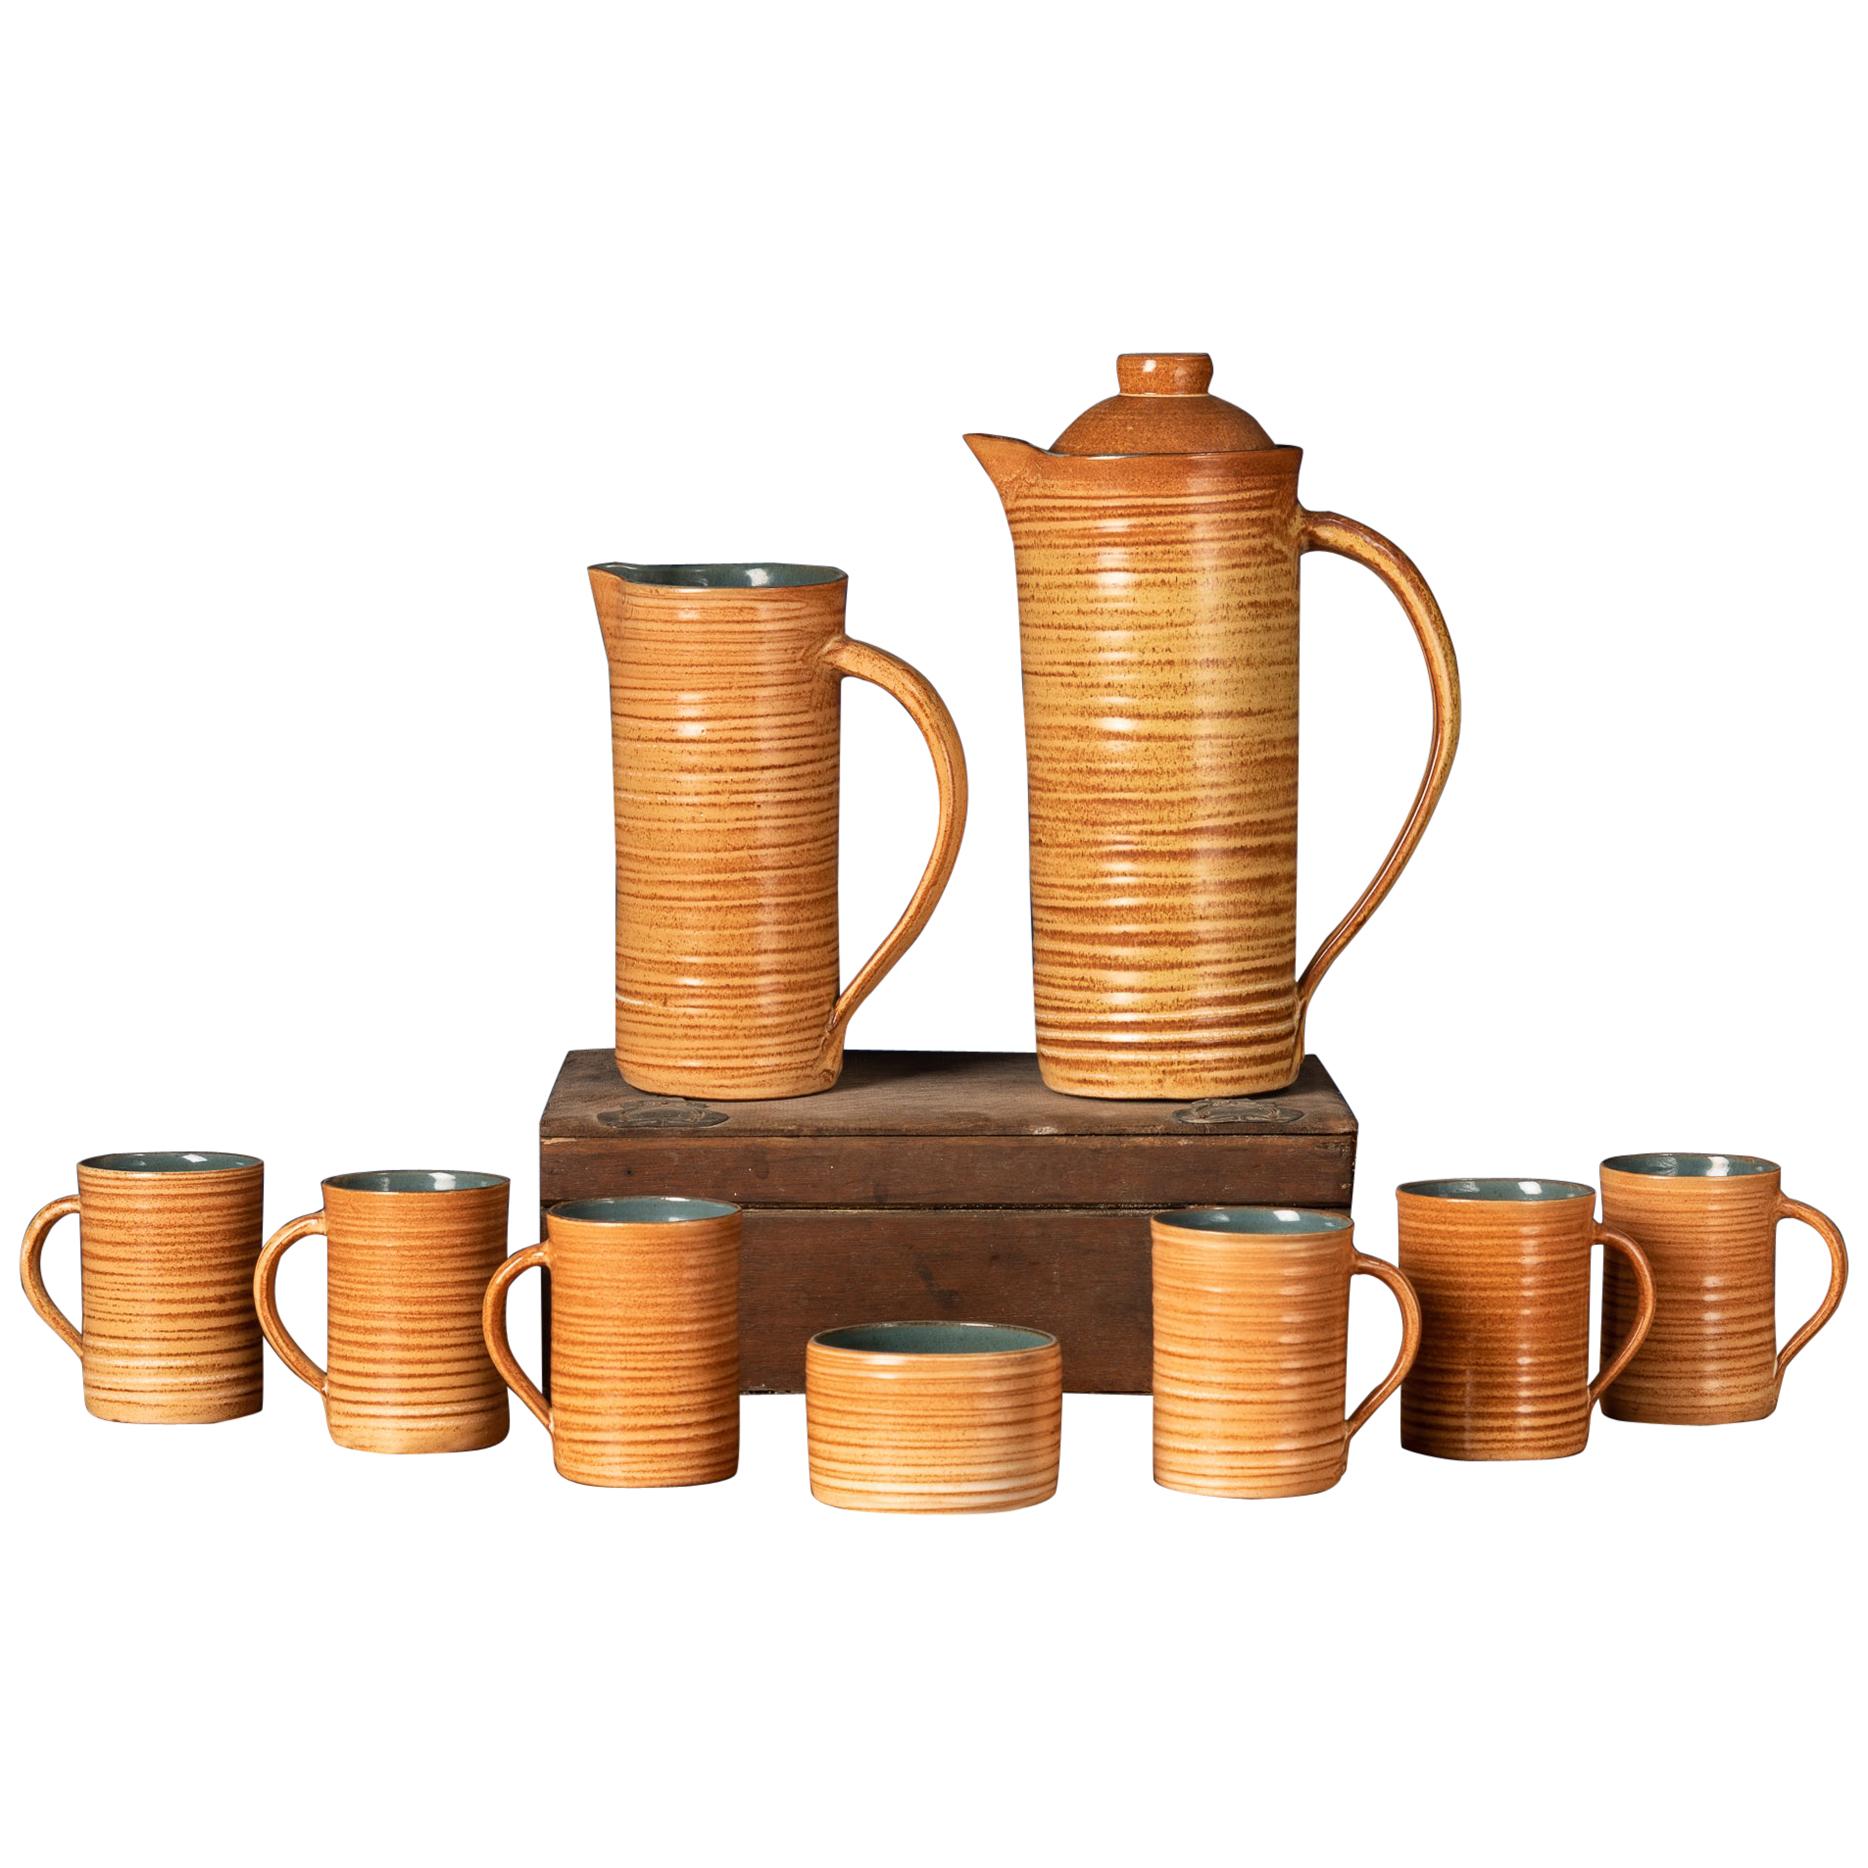 Rare Set of Handmade Ceramic Cups with Brown Spirals